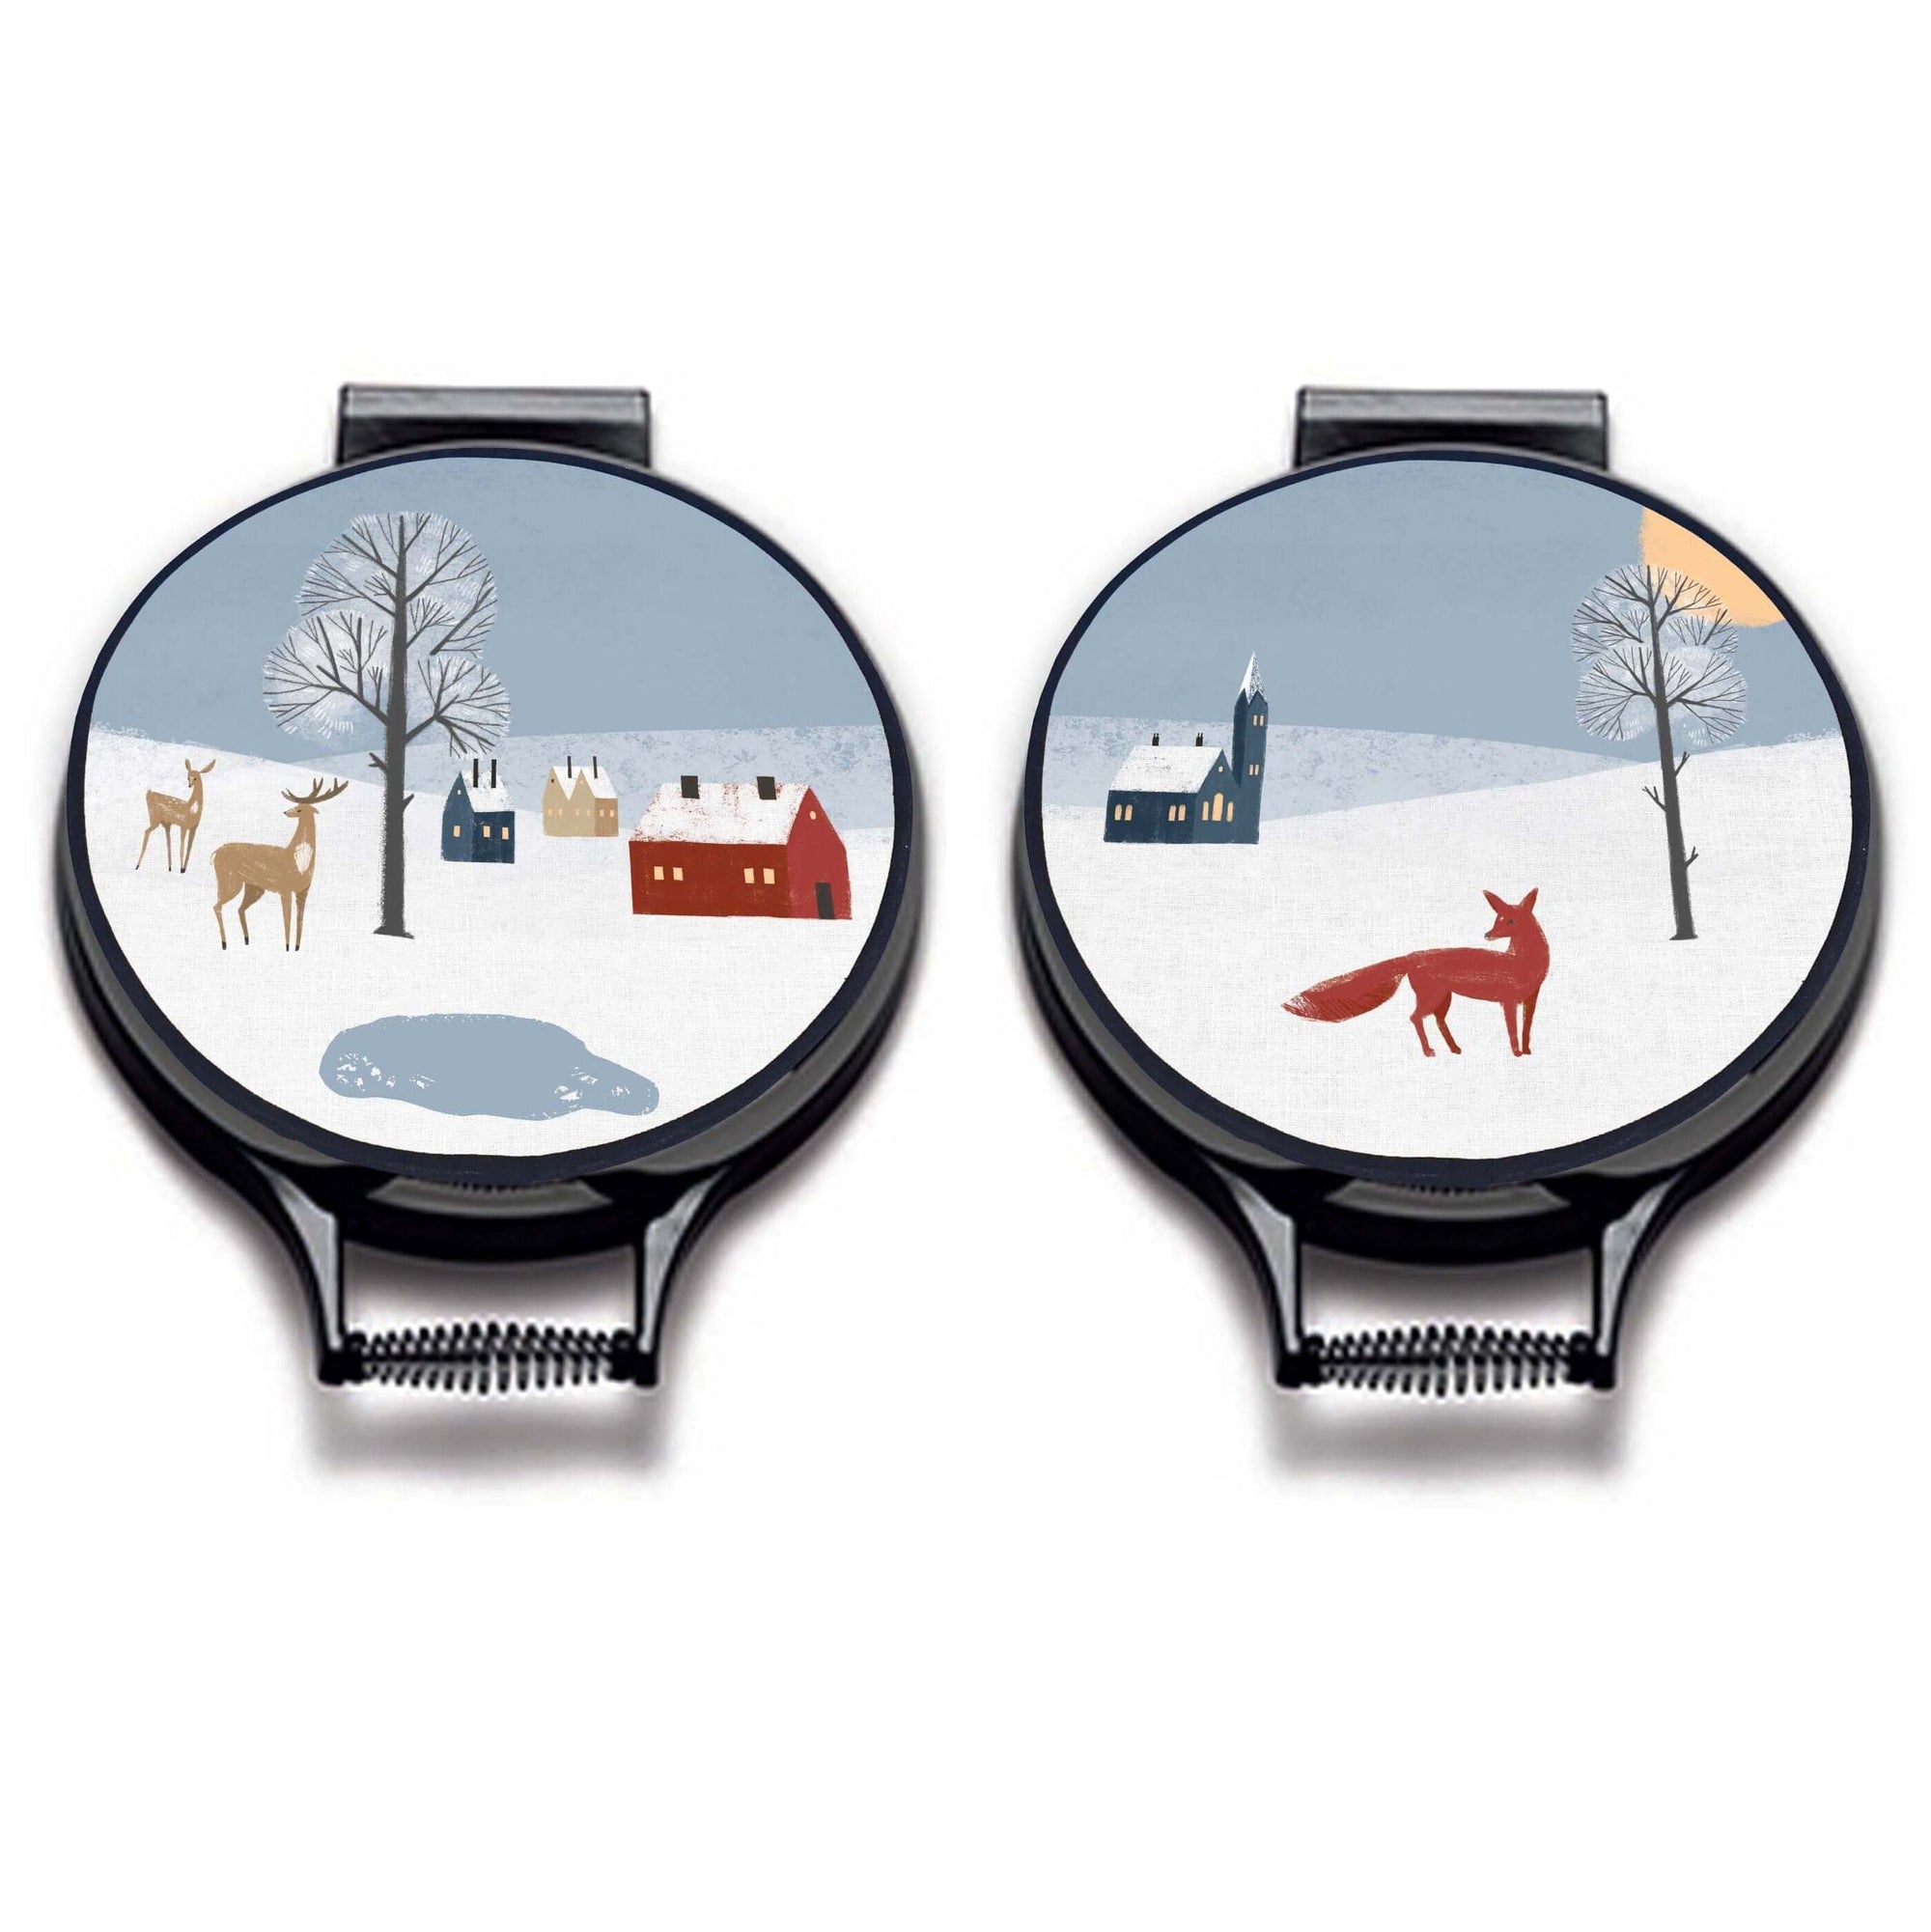 Set of 2. winter fox scandi modern print on a beige whith village scene including blue sky, a red fox, deer houses, church and pond linen circular hob cover with black hemming. Pictured on metal cooker lid on an isolated background. Mustard and Gray